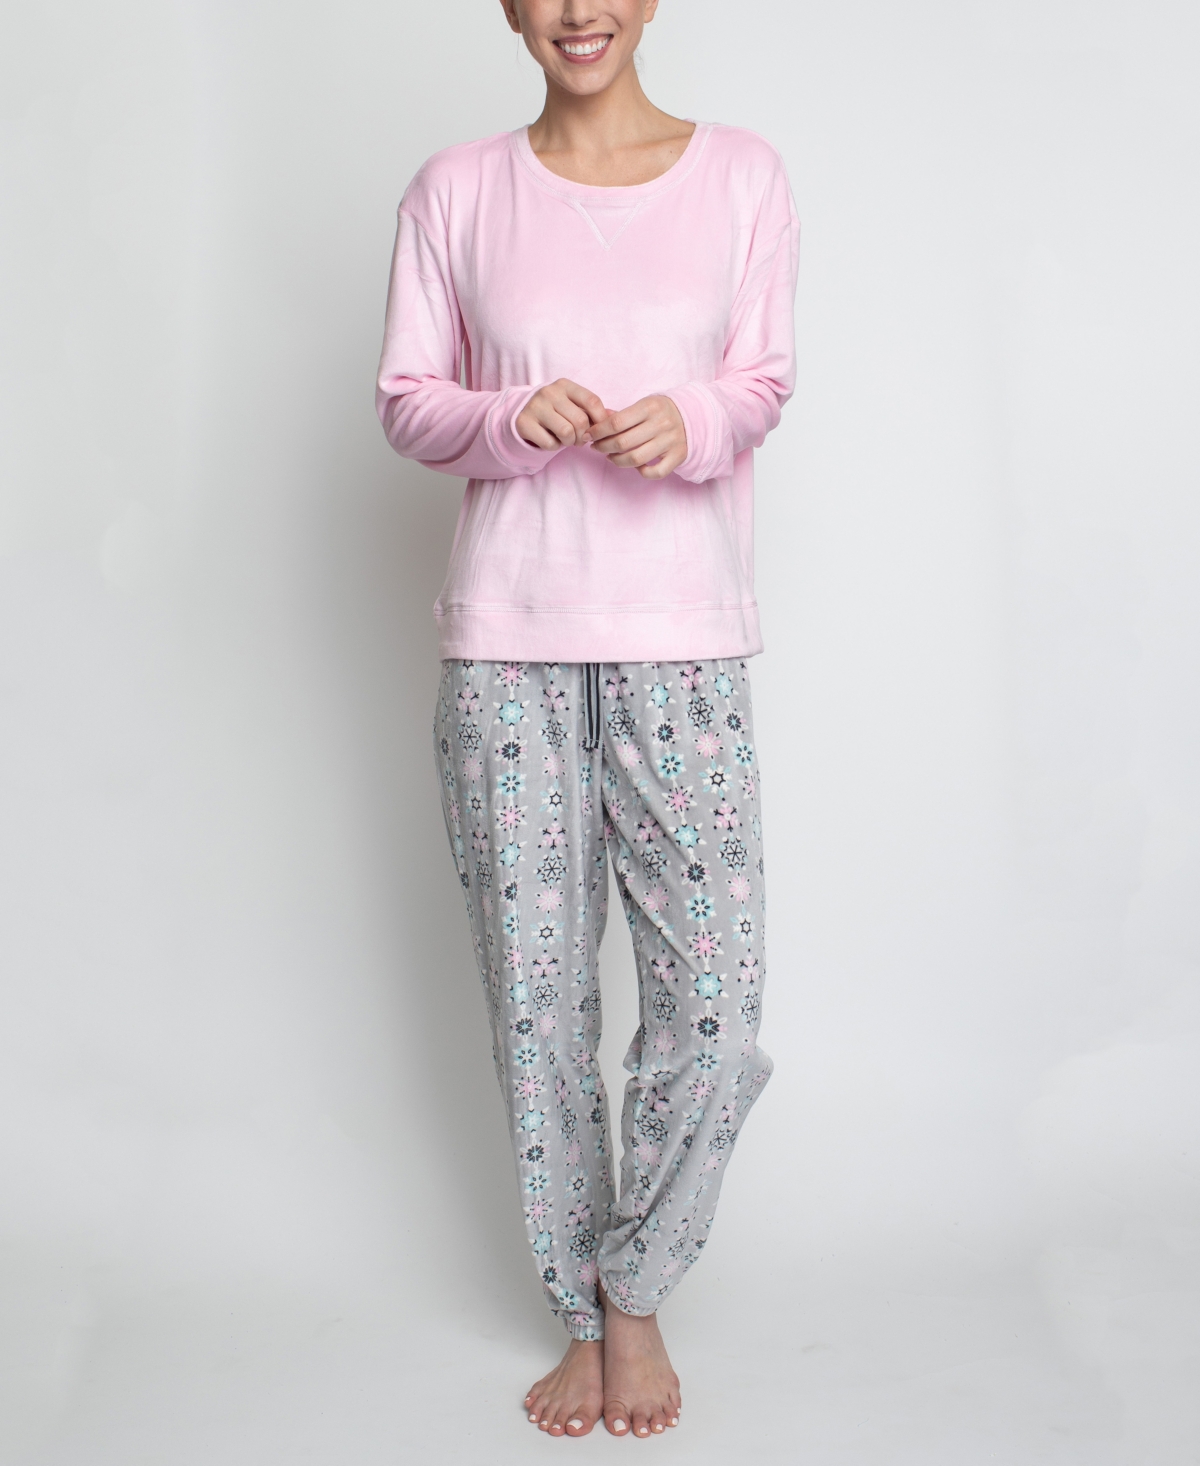 Women's Silky Velour Long Sleeve Top and Jog Style Pant Pajama Set, 2 Piece - Pink